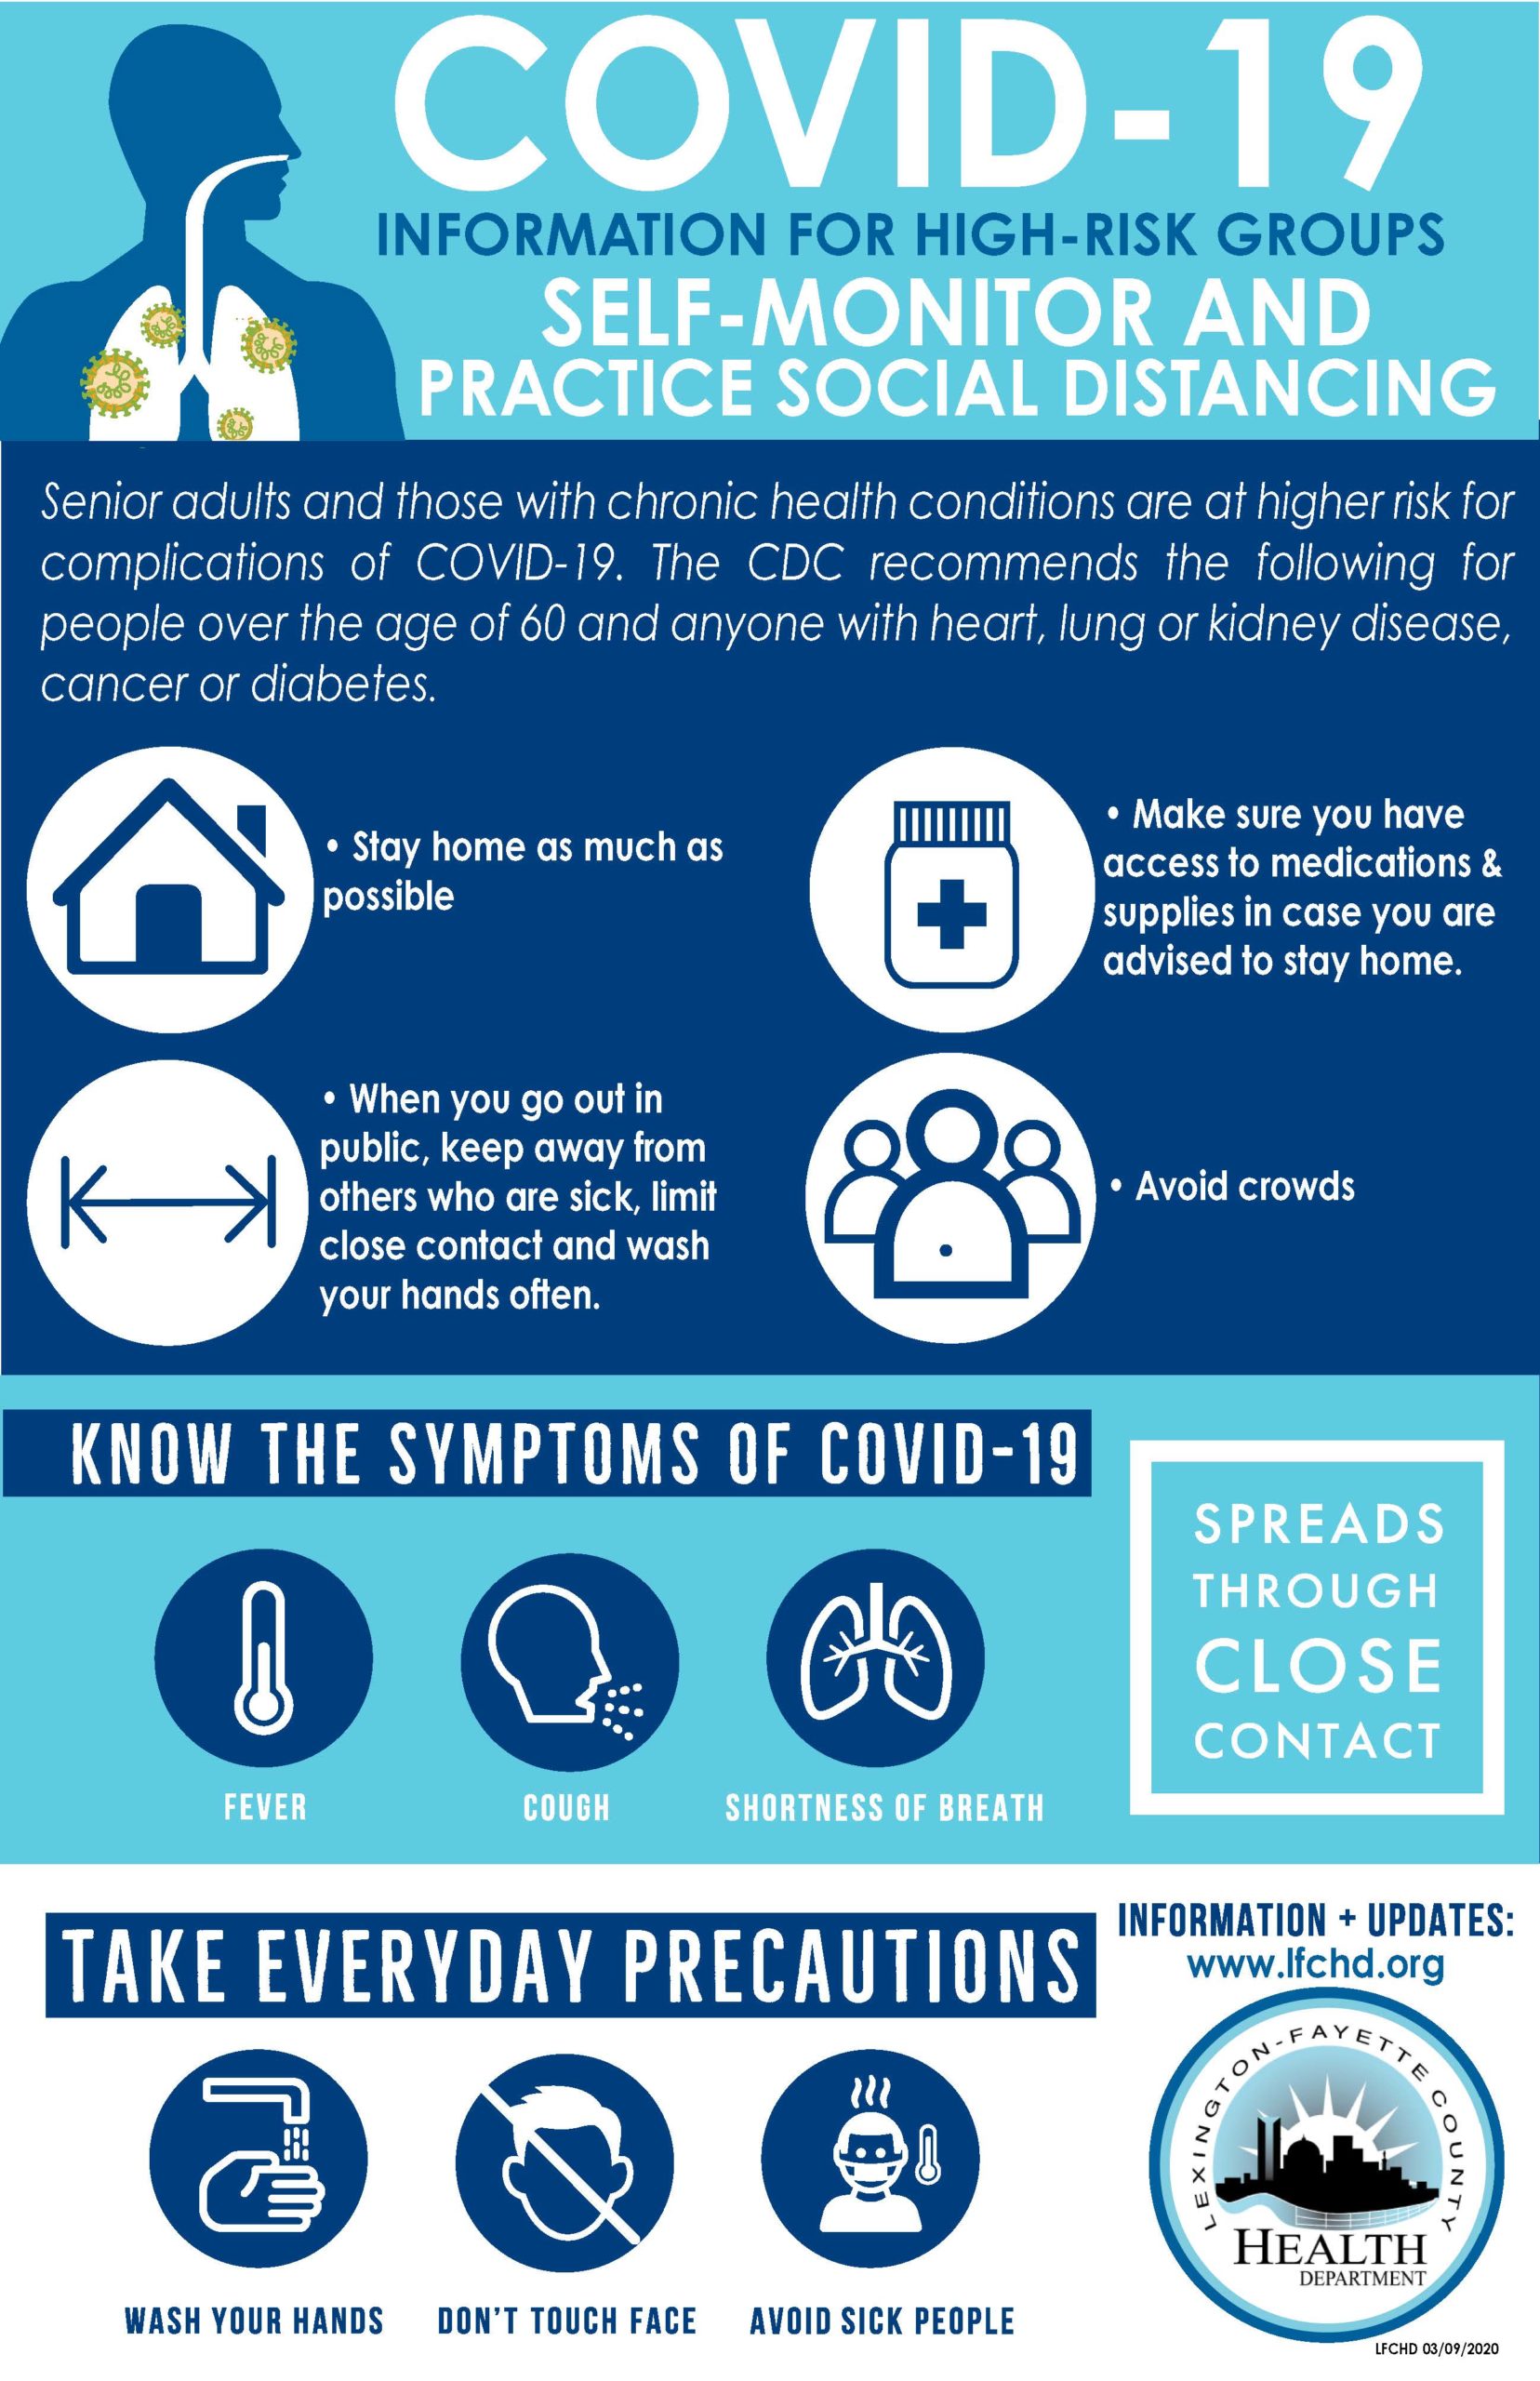 LFCHD urges caution for people at highest risk for COVID-19 complications